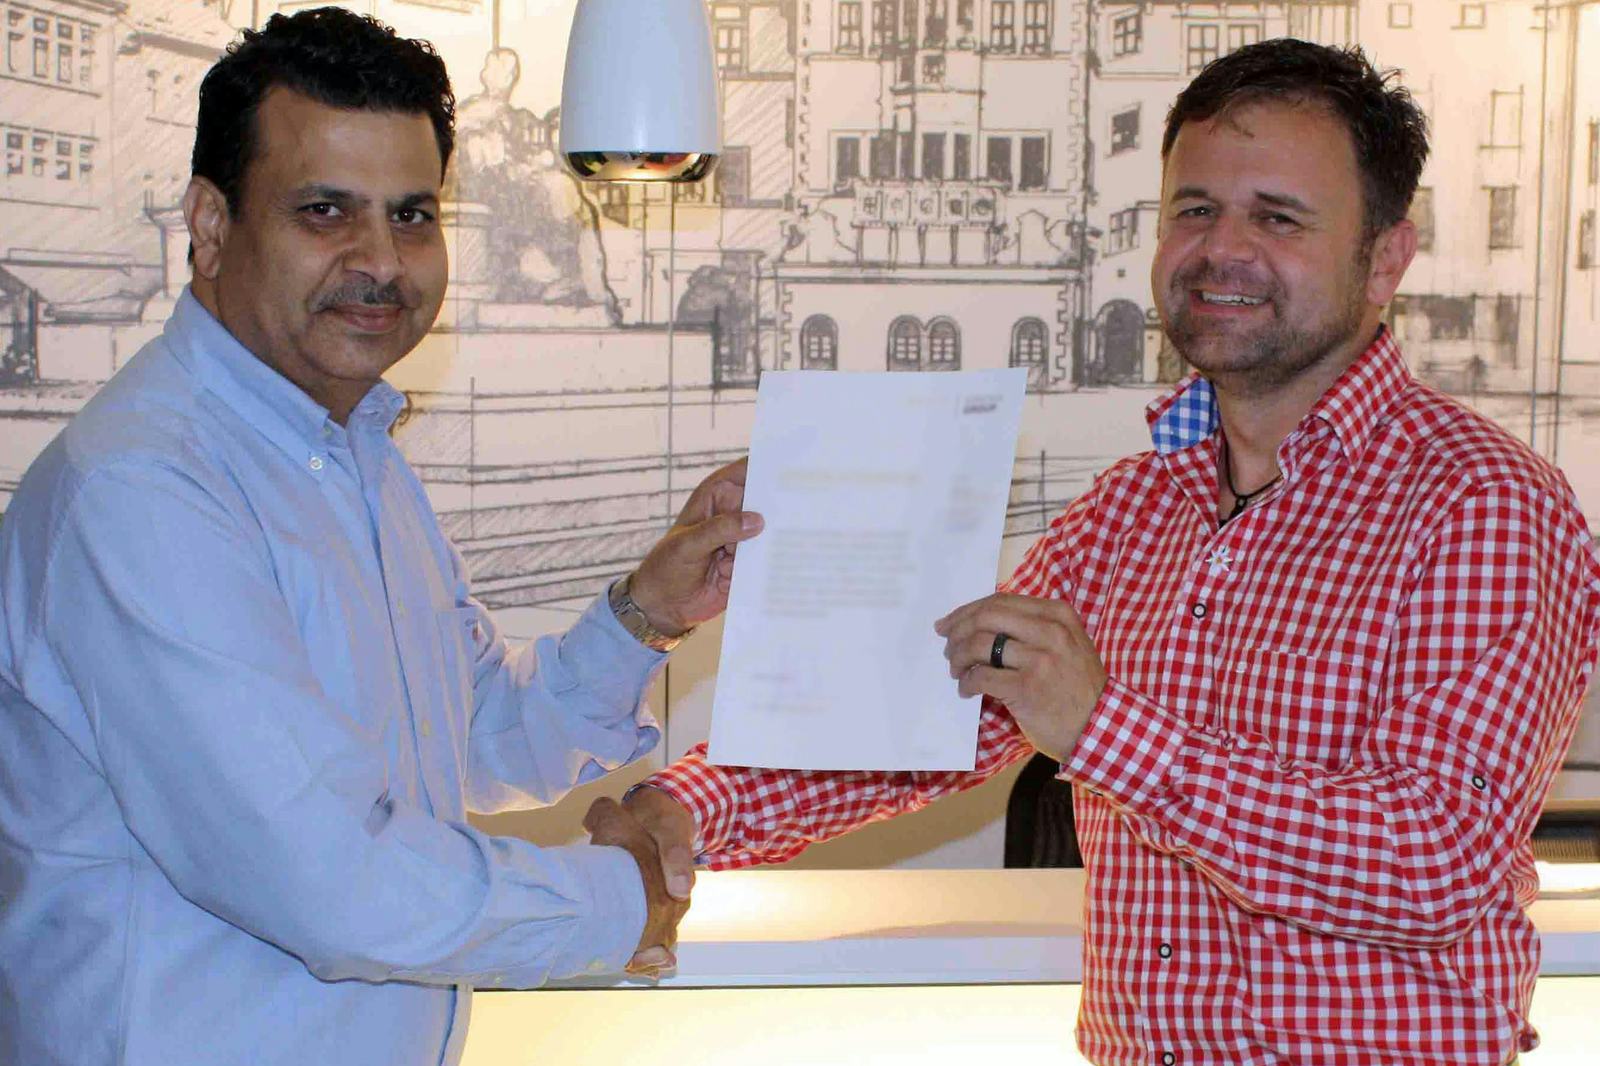 Bernd Lesch (Export Manager) of Winora Group (right) together with Rajesh Kalra, CEO Suncross (Naren International). - Photo Winora